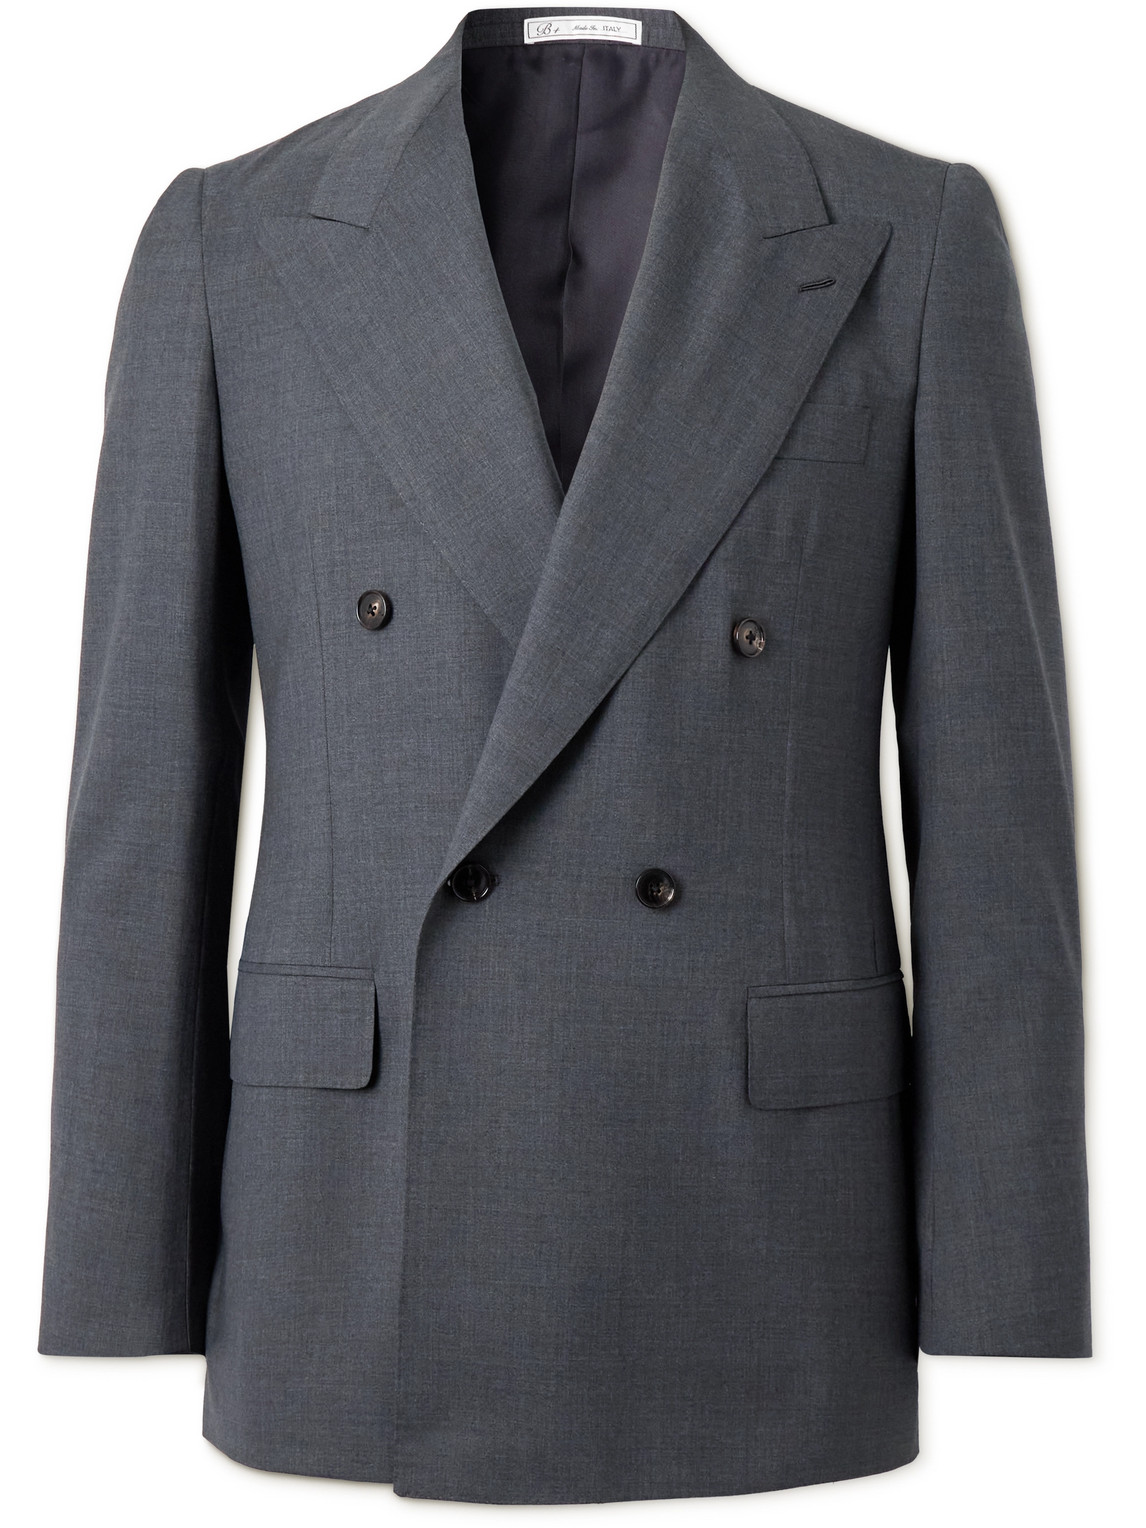 Umit Benan B+ Double-breasted Wool Suit Jacket In Gray